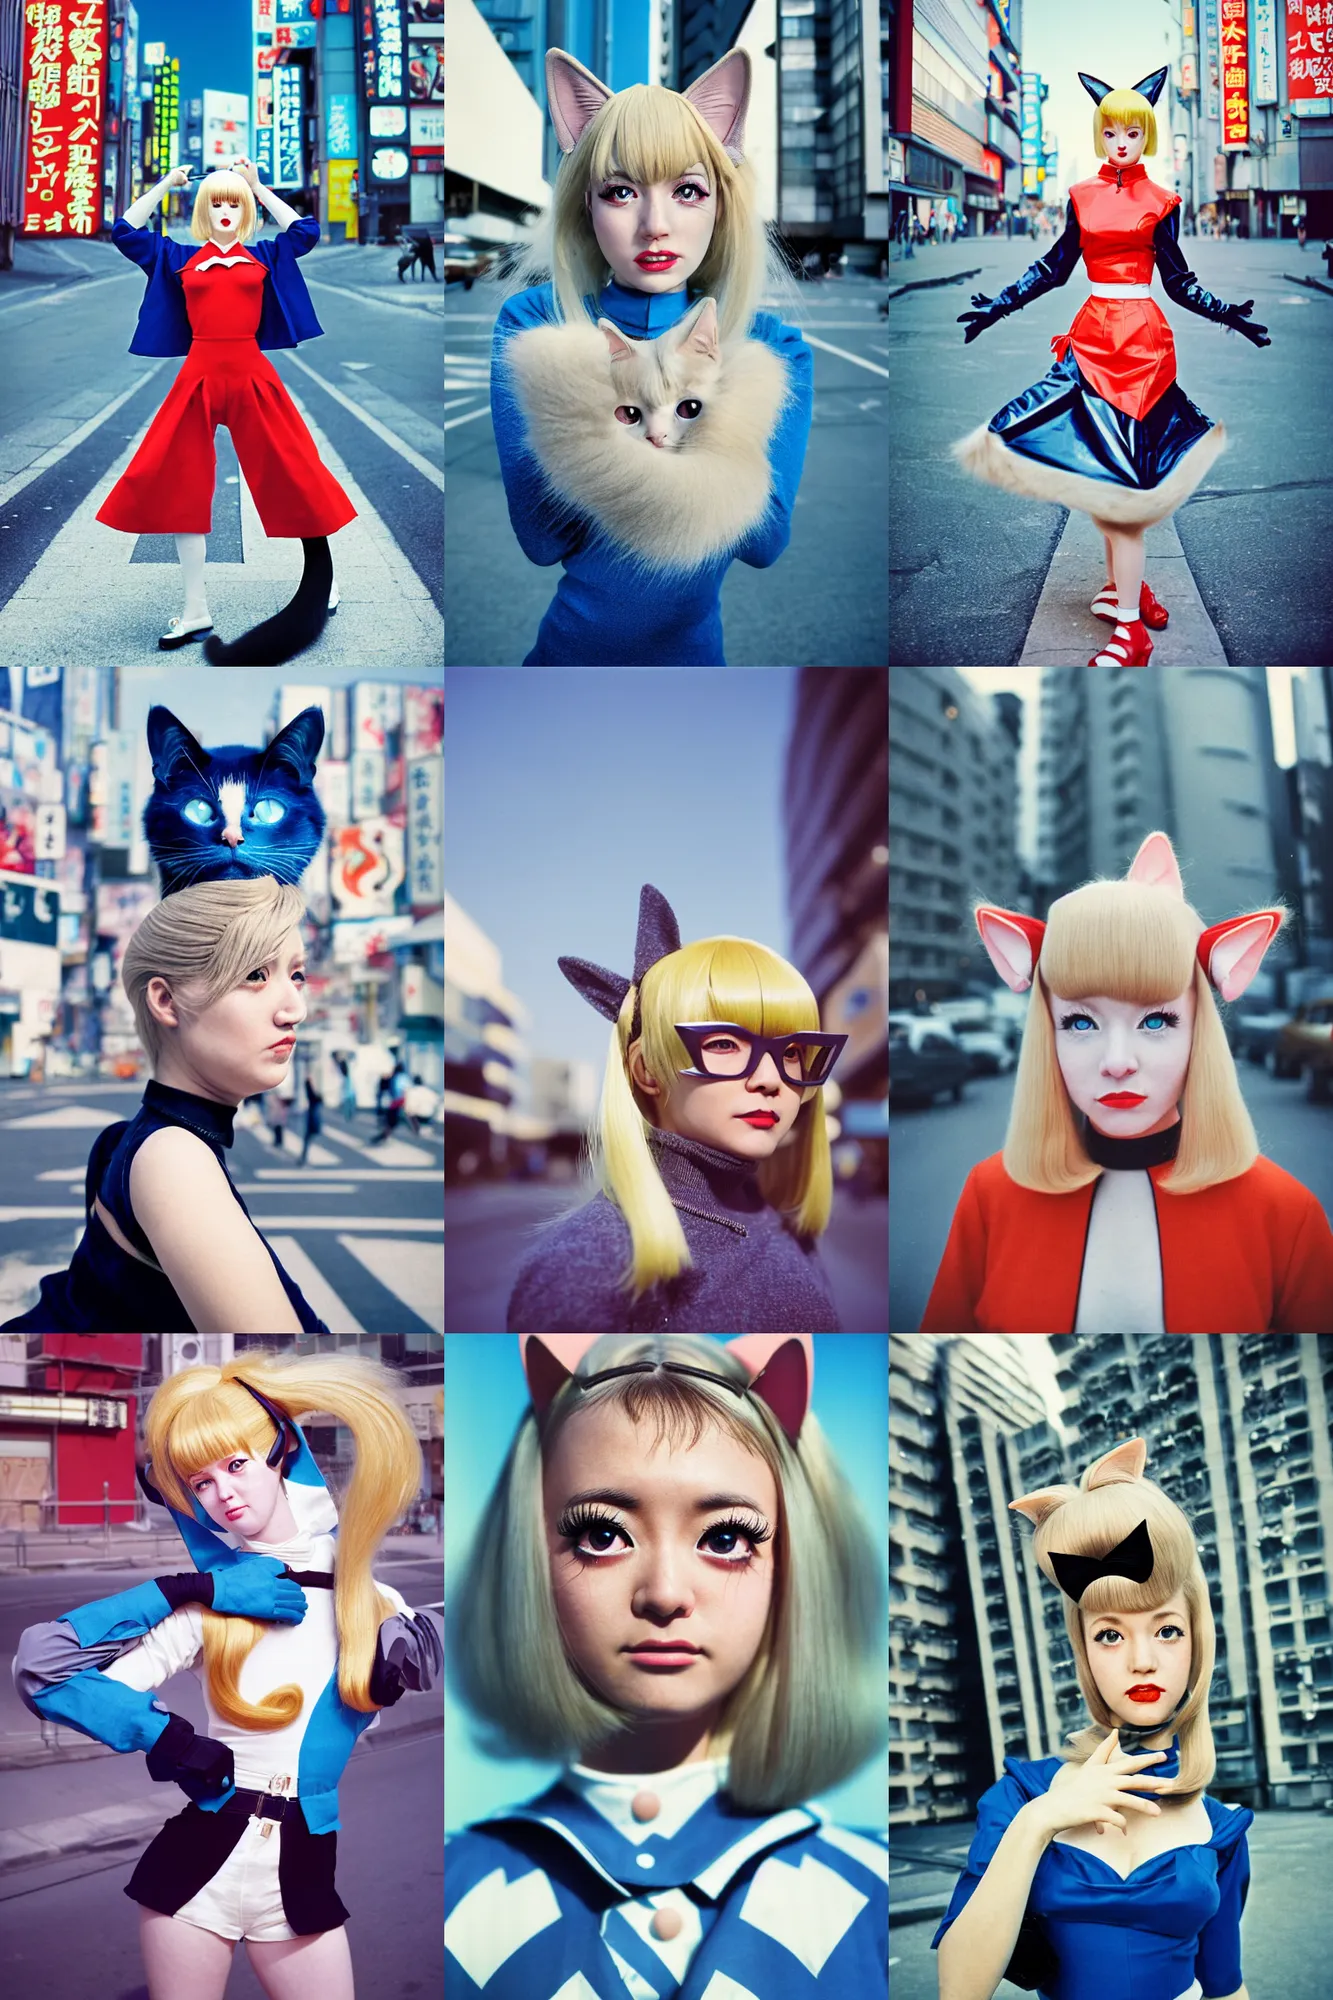 Prompt: Kodak portra 400,8K,highly detailed: beautiful three point perspective extreme closeup dance portrait photo in style of 1960s frontiers in cosplay retrofuturism tokyo seinen manga street photography fashion edition, tilt shift zaha hadid style tokyo background, highly detailed, focus on cat ears;blonde hair;blue eyes, clear eyes, soft lighting